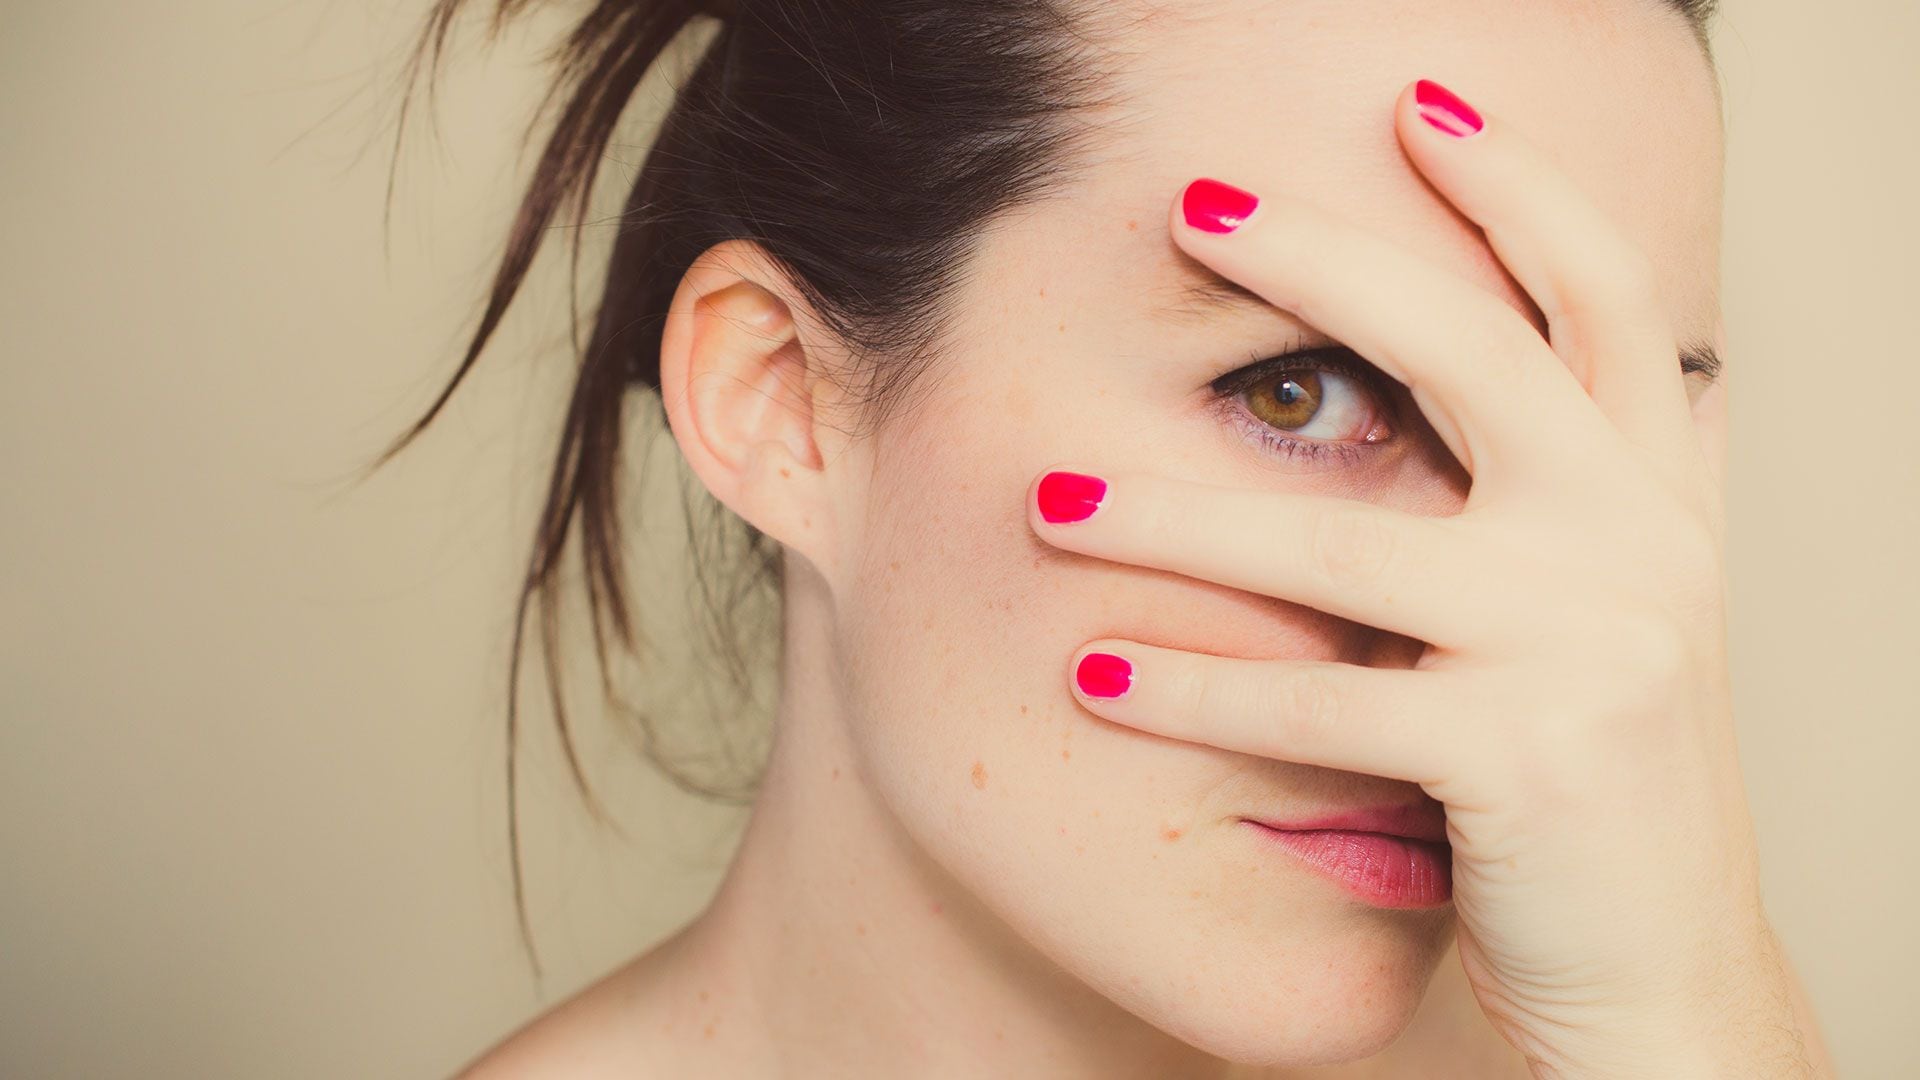 Close-up portrait. Girl covering her face with one hand and looking between her fingers. One brown eye and gathered hair. (Getty)